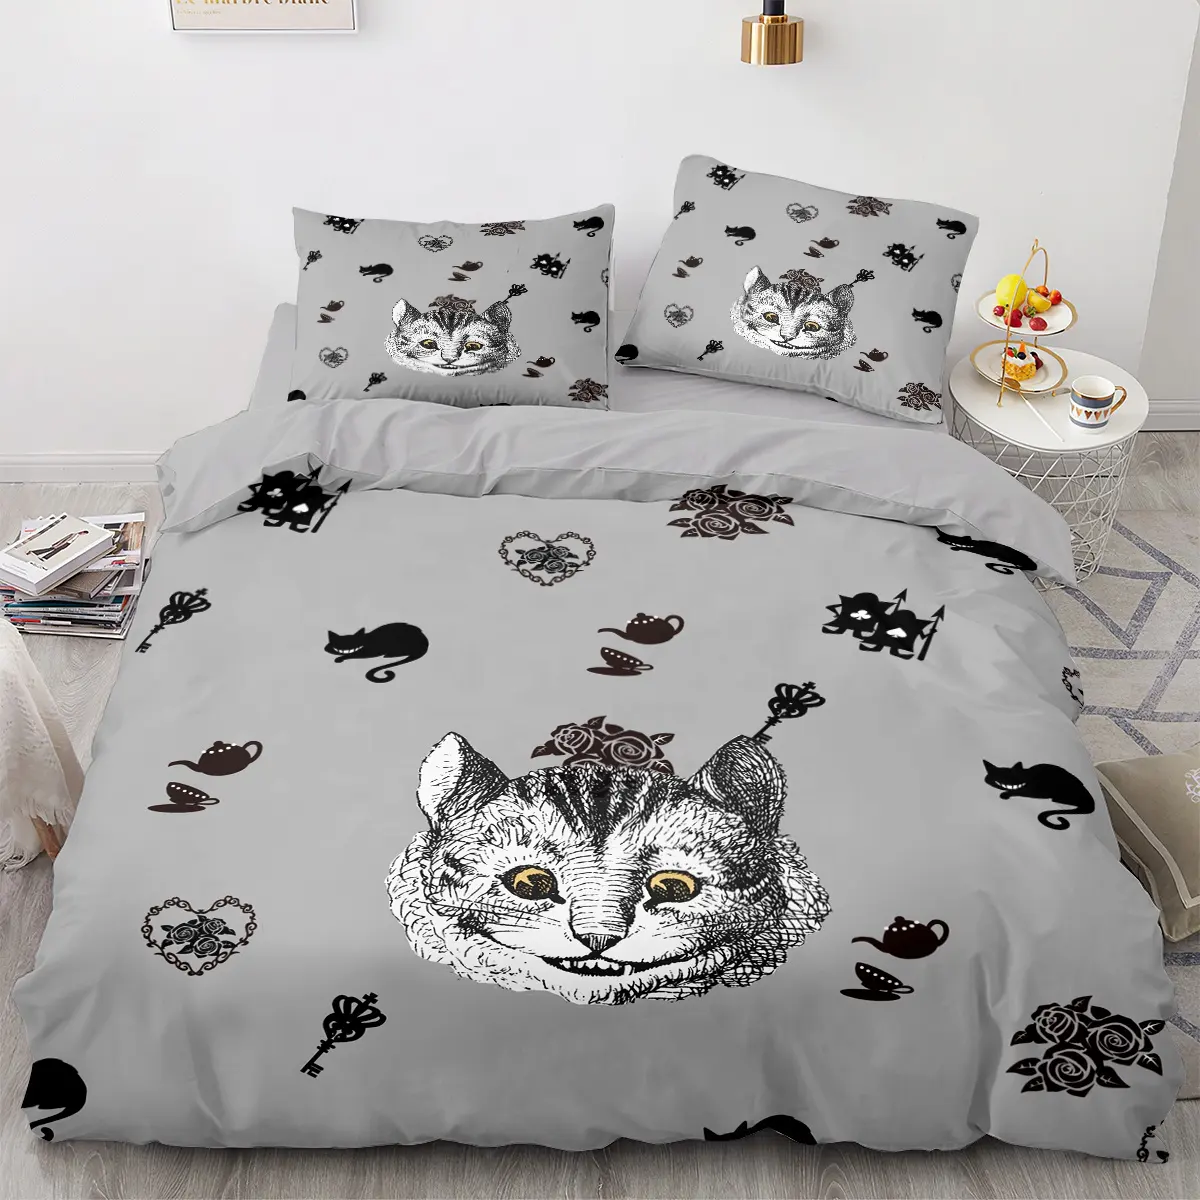 Hot Selling High Quality Customizable Comfortable and Soft Bedding Set Factory Direct Supply for Bedroom Decoration